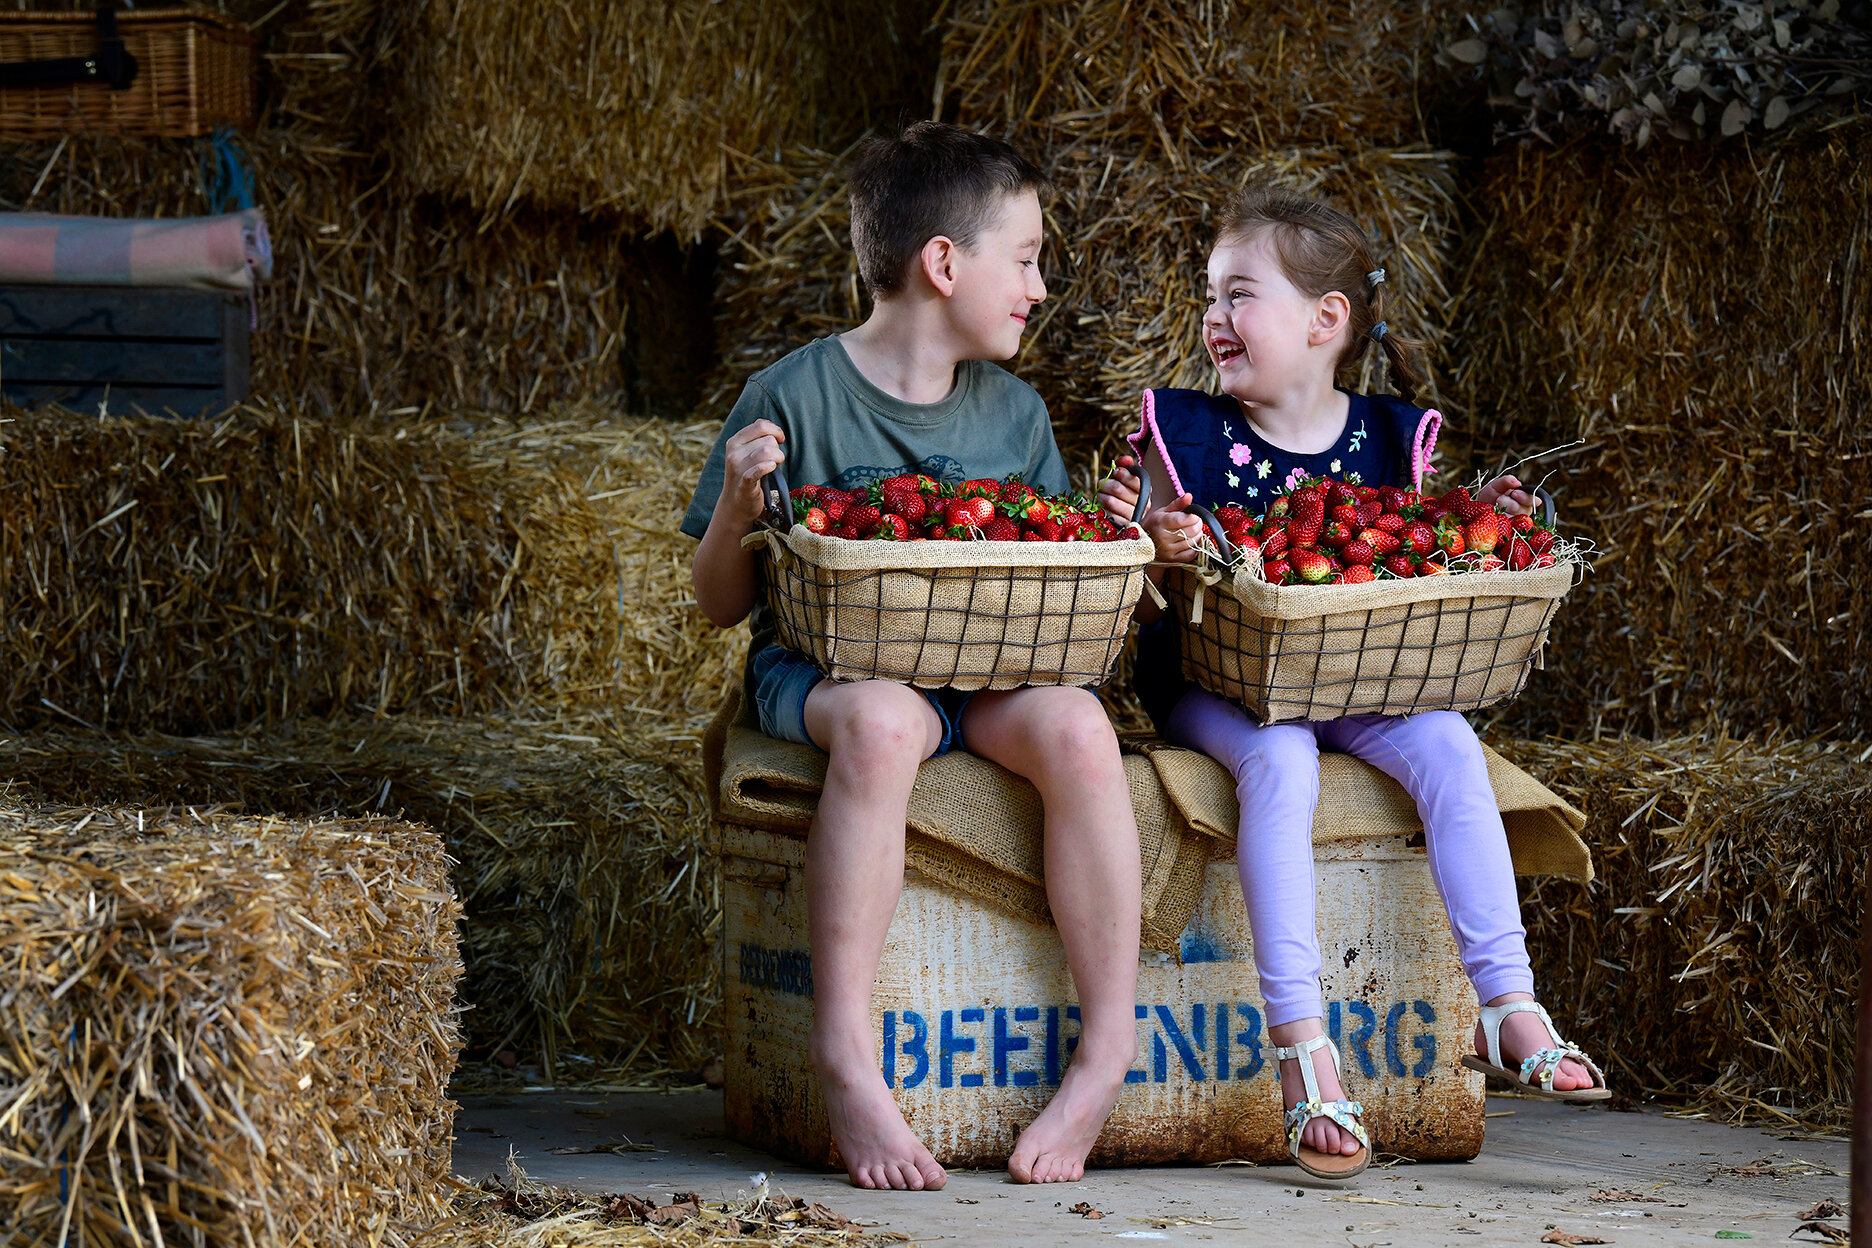  2.11.18 - Siblings Aston, 8, and Kenzi Fountain, 4, enjoy some strawberries they picked at Beerenberg farm, Hahndorf. Strawberry season has begun and  Beerenberg are looking forward to a great season despite the earlier set back of the needle issues